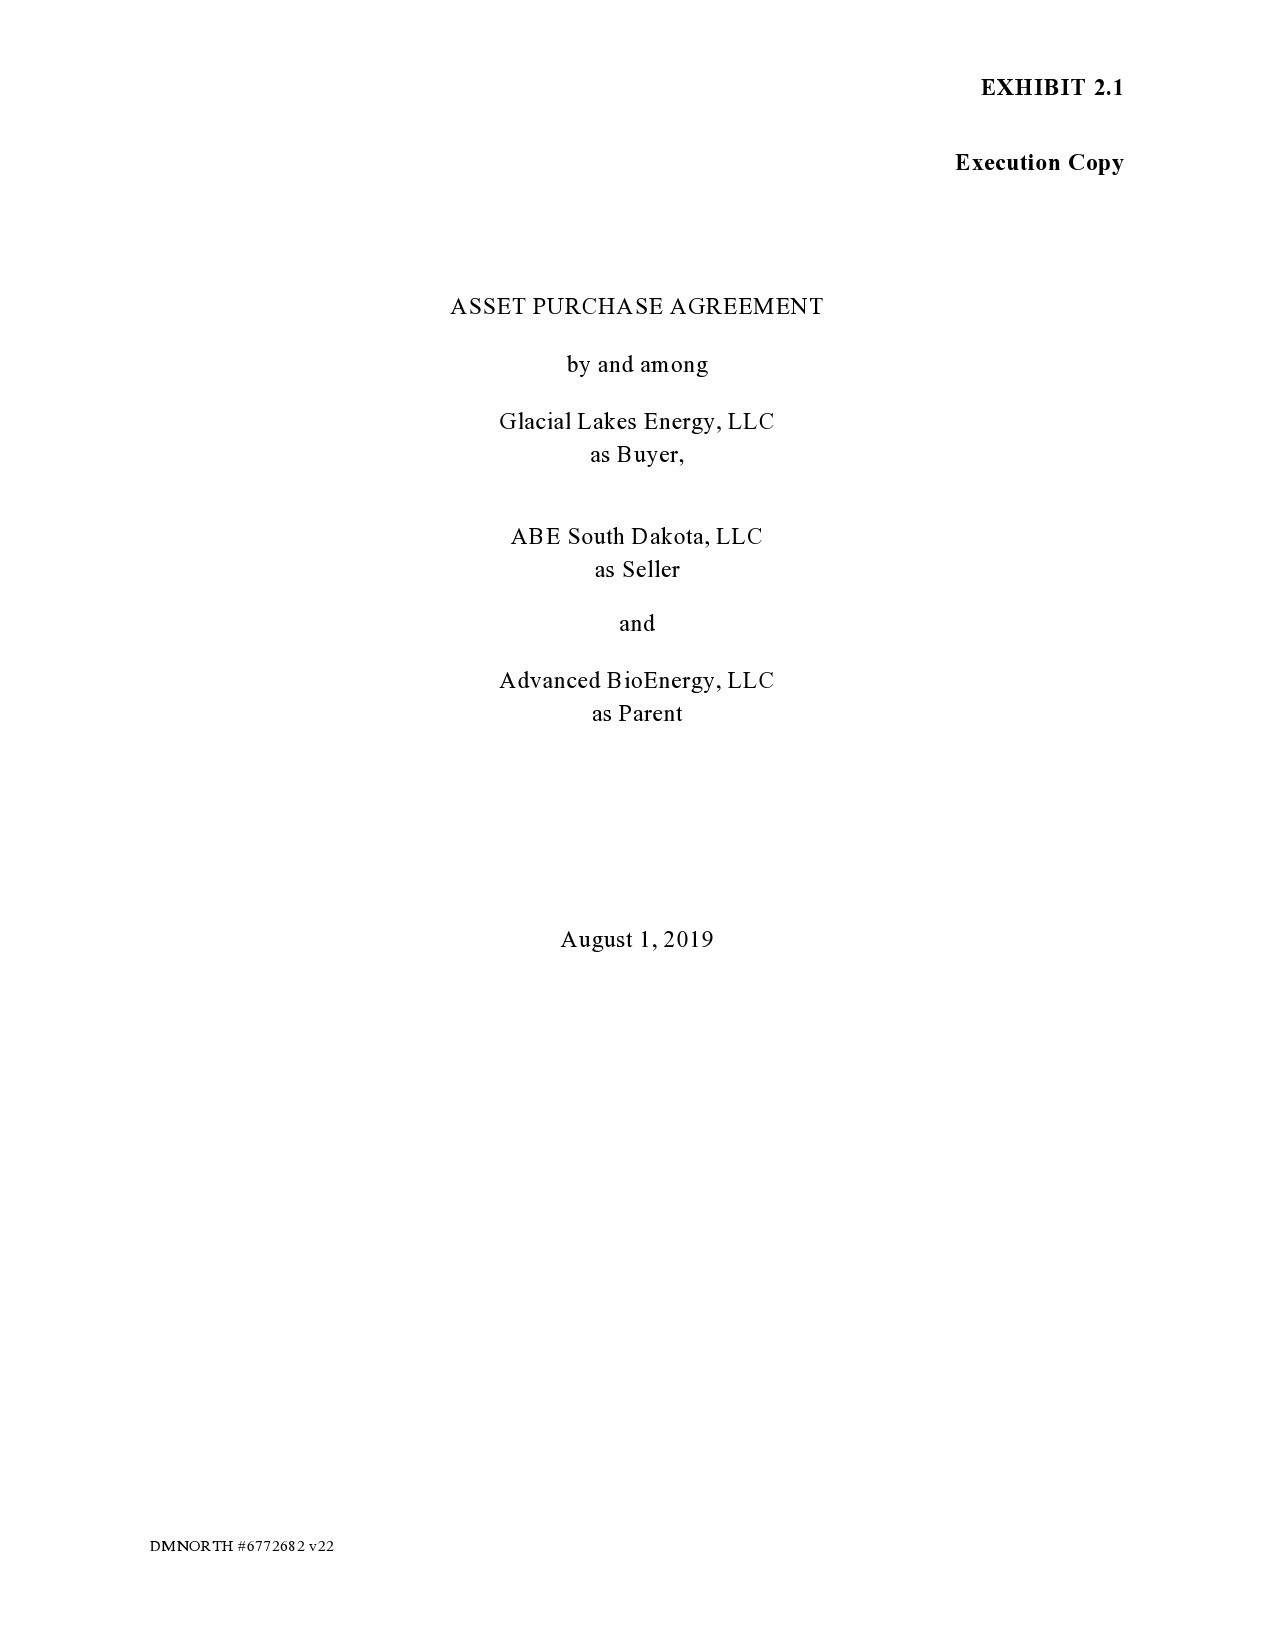 Free asset purchase agreement 19